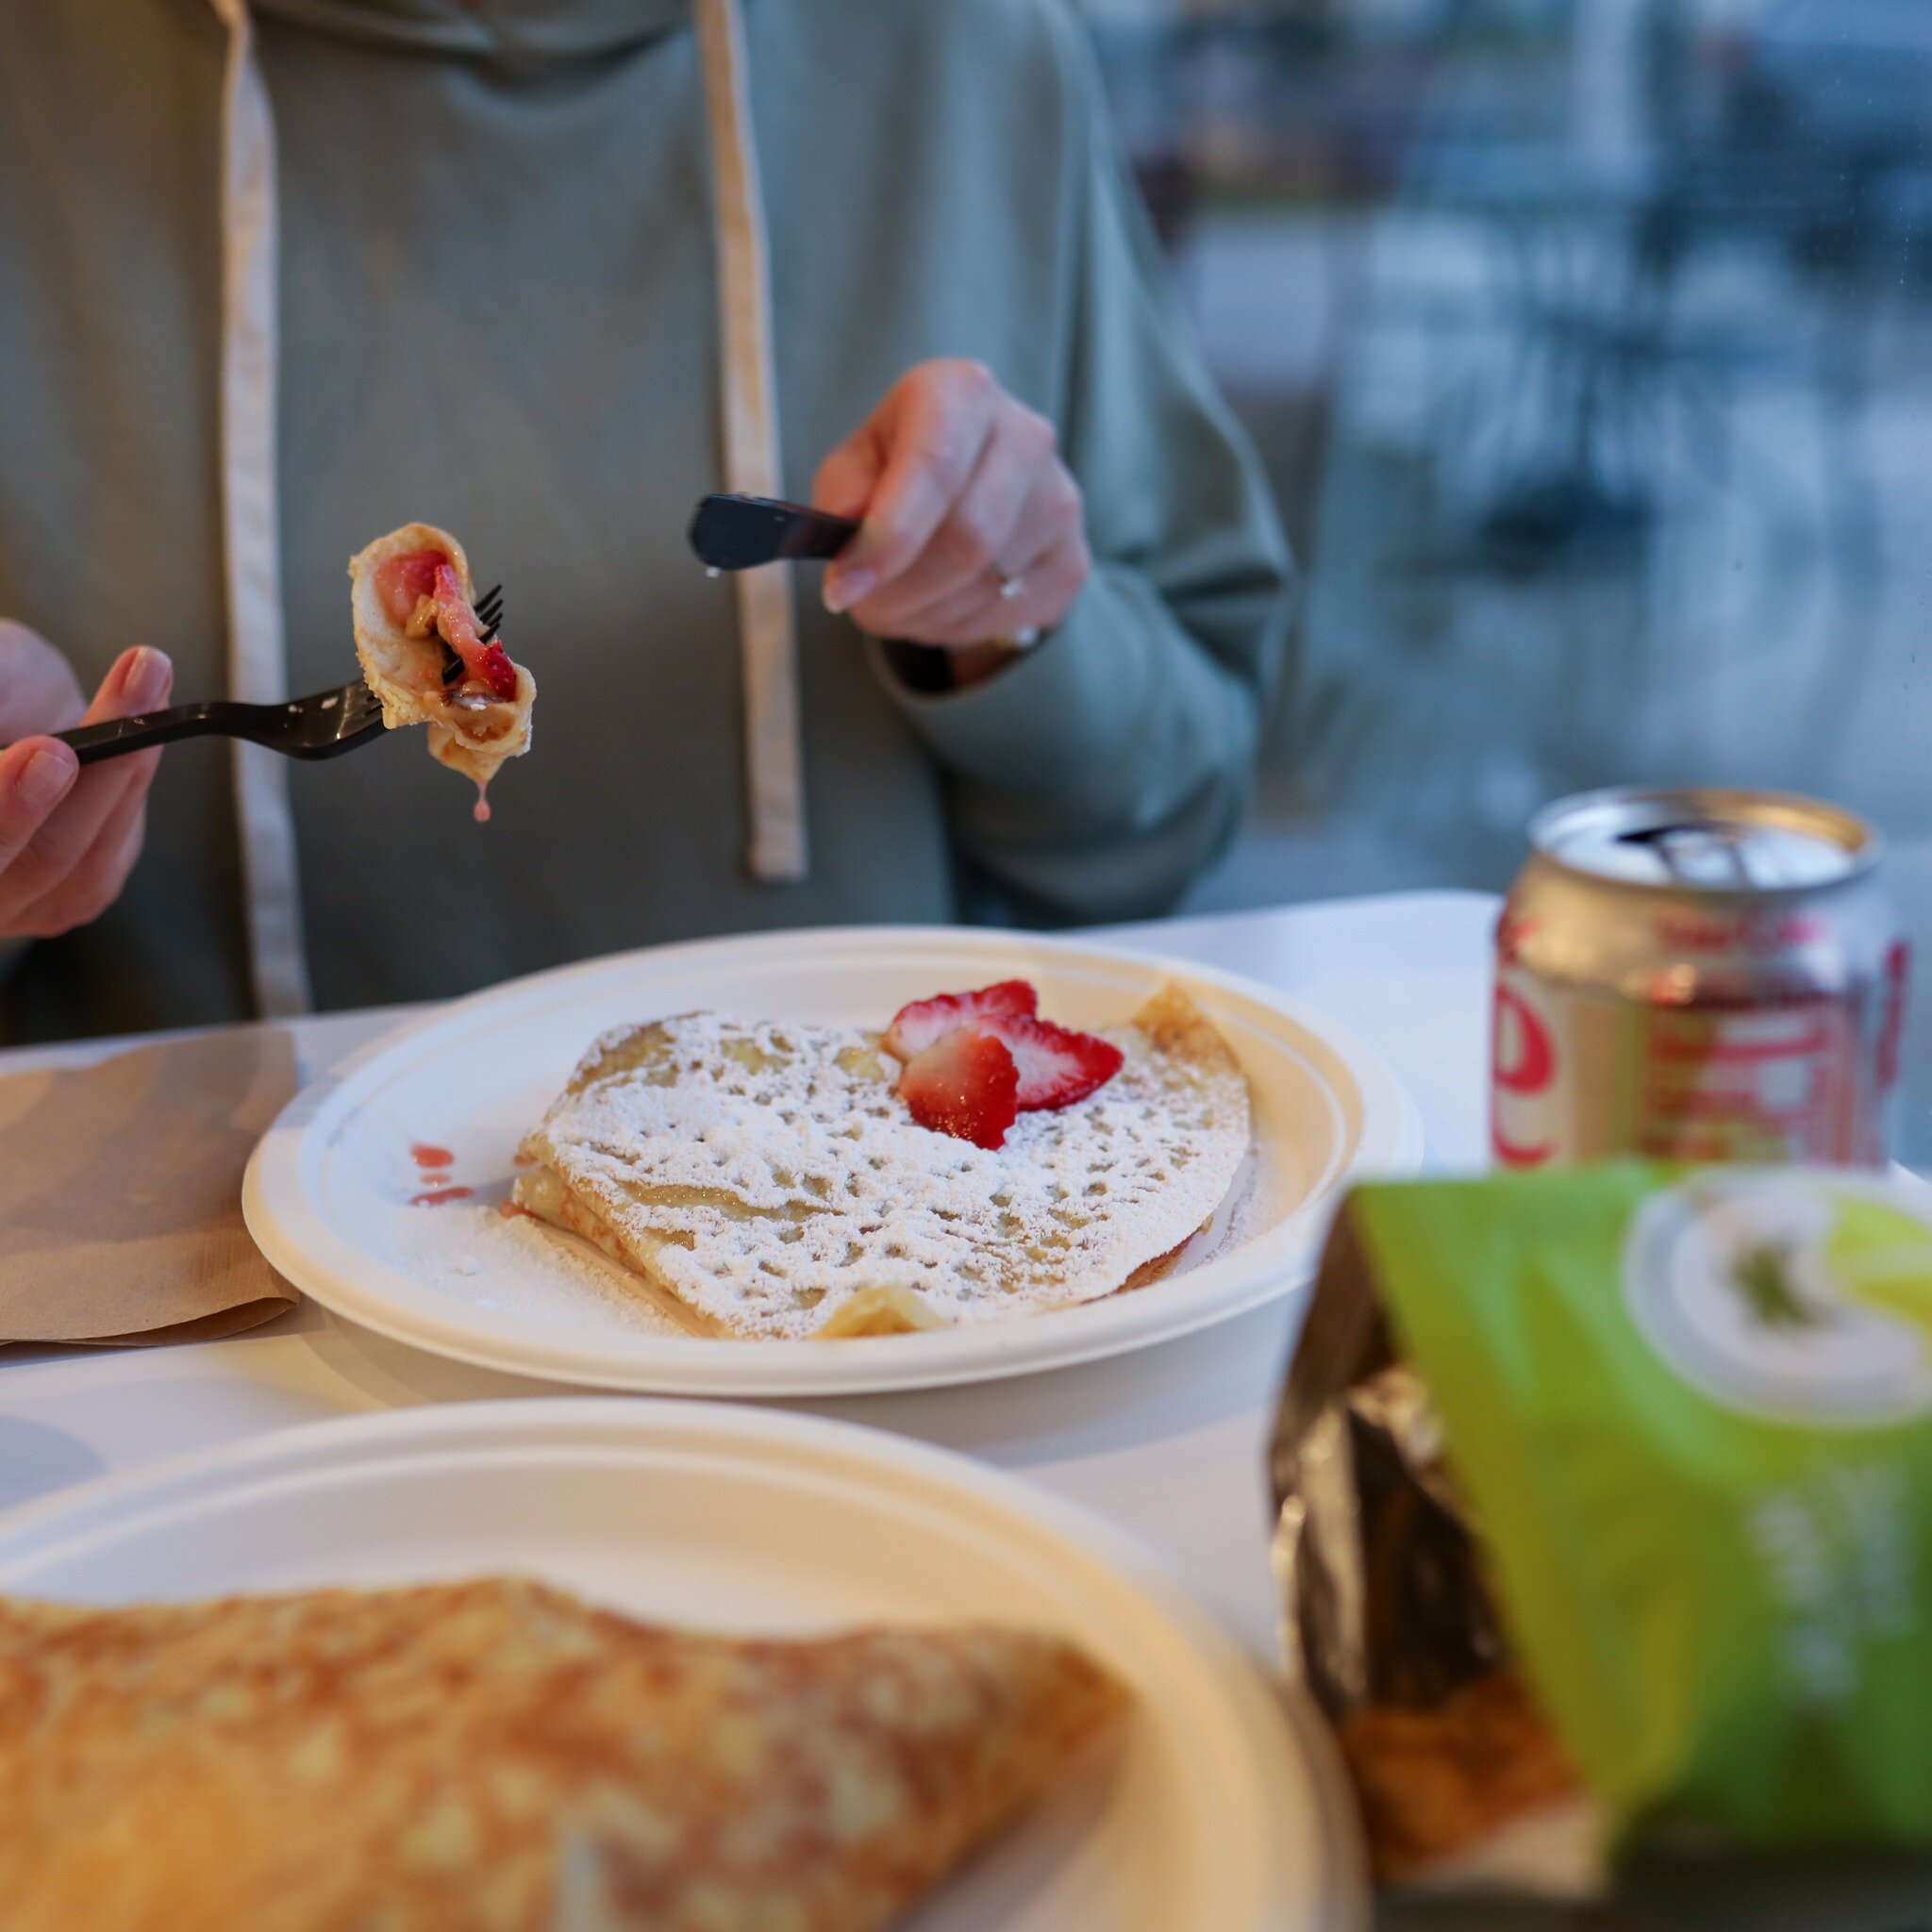 Rainy day life hack: Lunch at Hazelnuts Cr&ecirc;perie! 

Cr&ecirc;pe highlight: THE BERRY DELIGHT Strawberries, Goat Cheese &amp; Crushed Walnuts Drizzled With Honey, Topped With Powdered Sugar

 #explorenc #ballantyne #eatdrinkclt #clteats #hazelnu